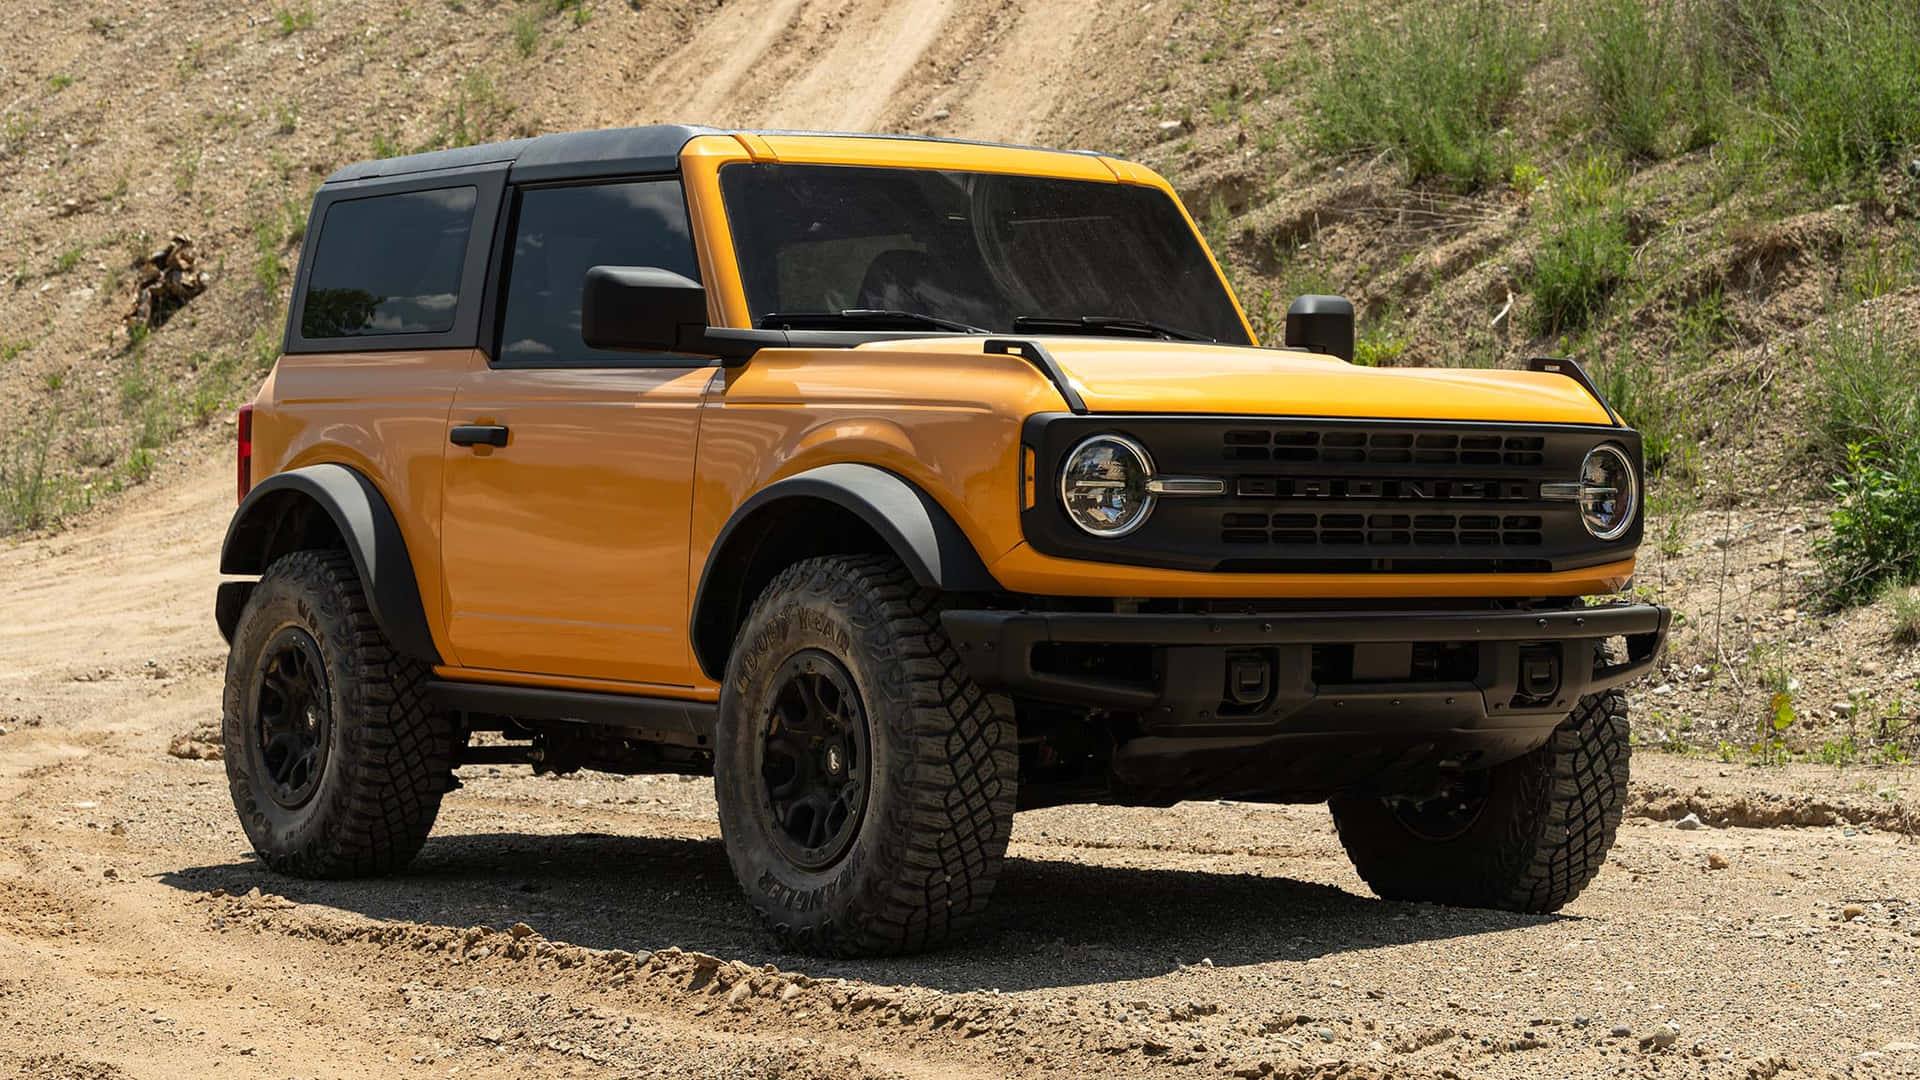 Short and Sweet: The Iconic Ford Bronco